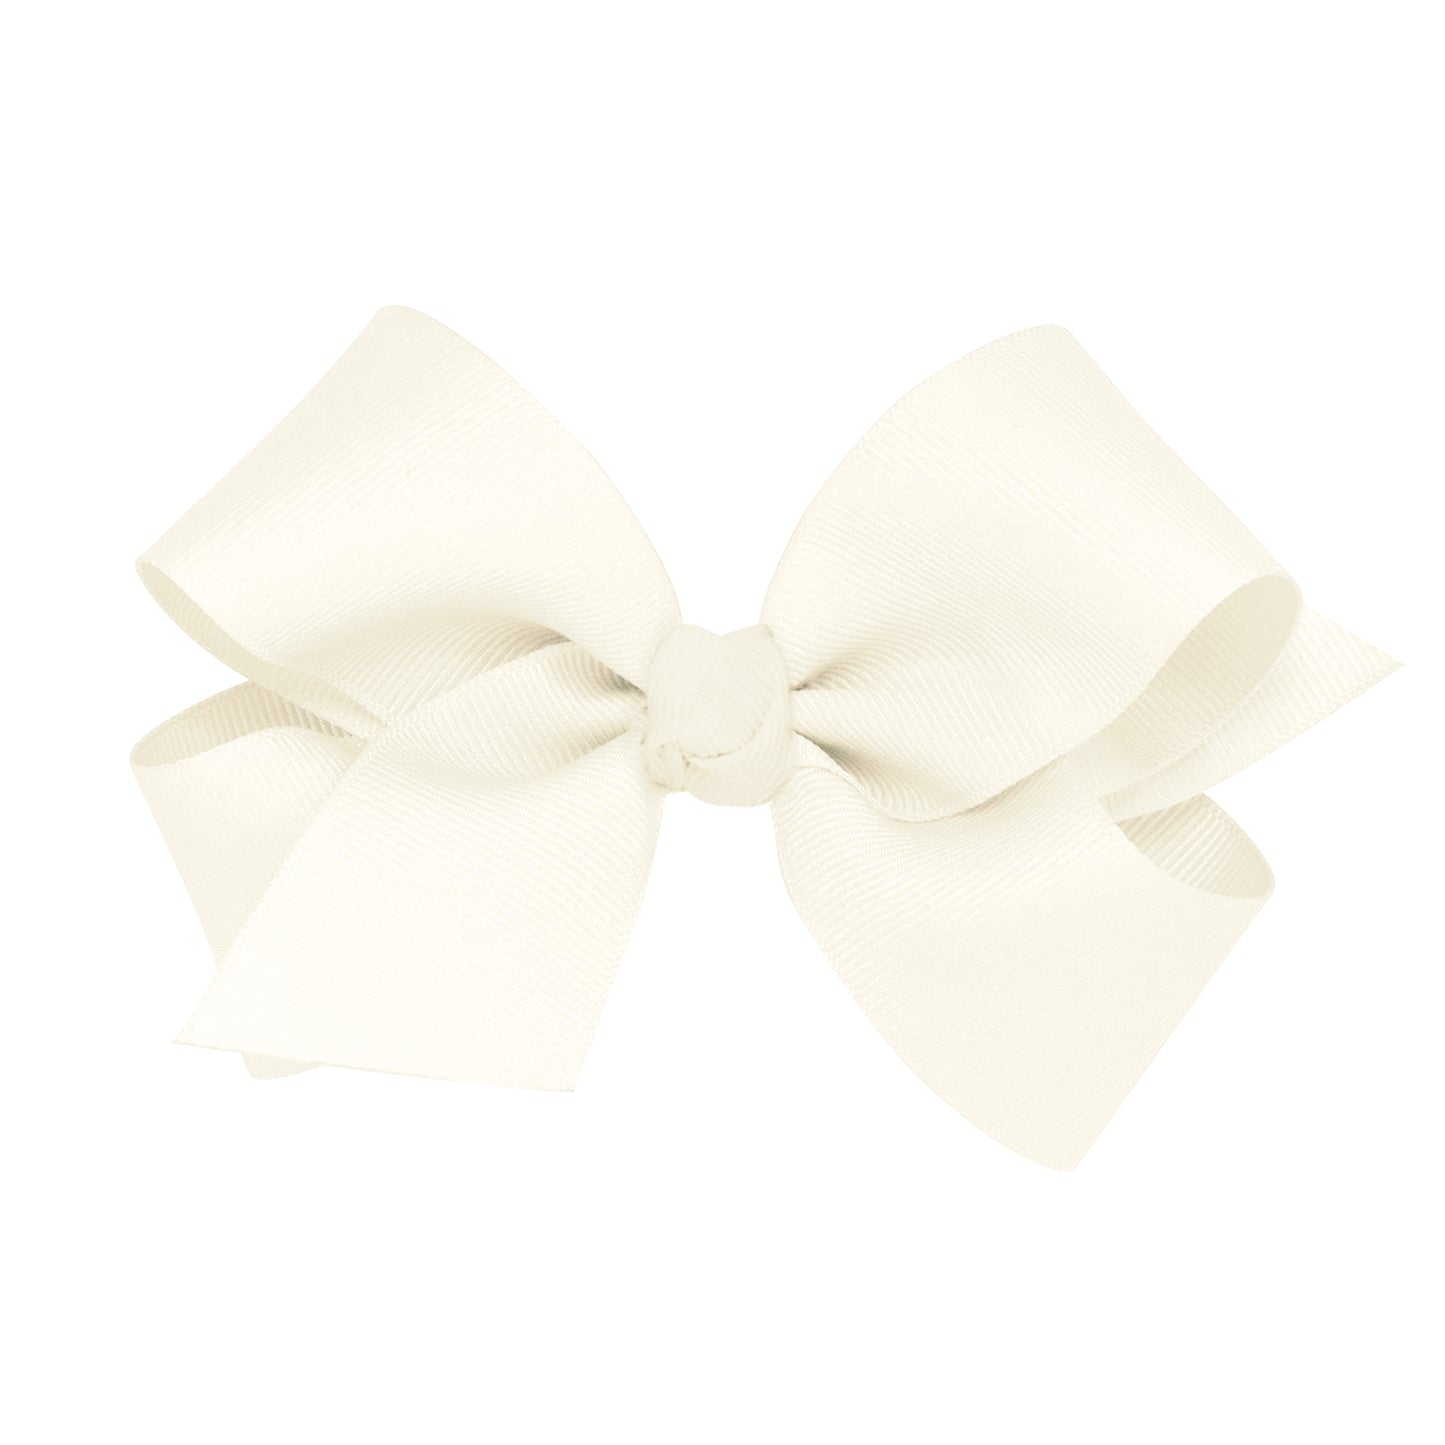 Wee Ones Medium Grosgrain Hair Bow with Center Knot  - Antique White